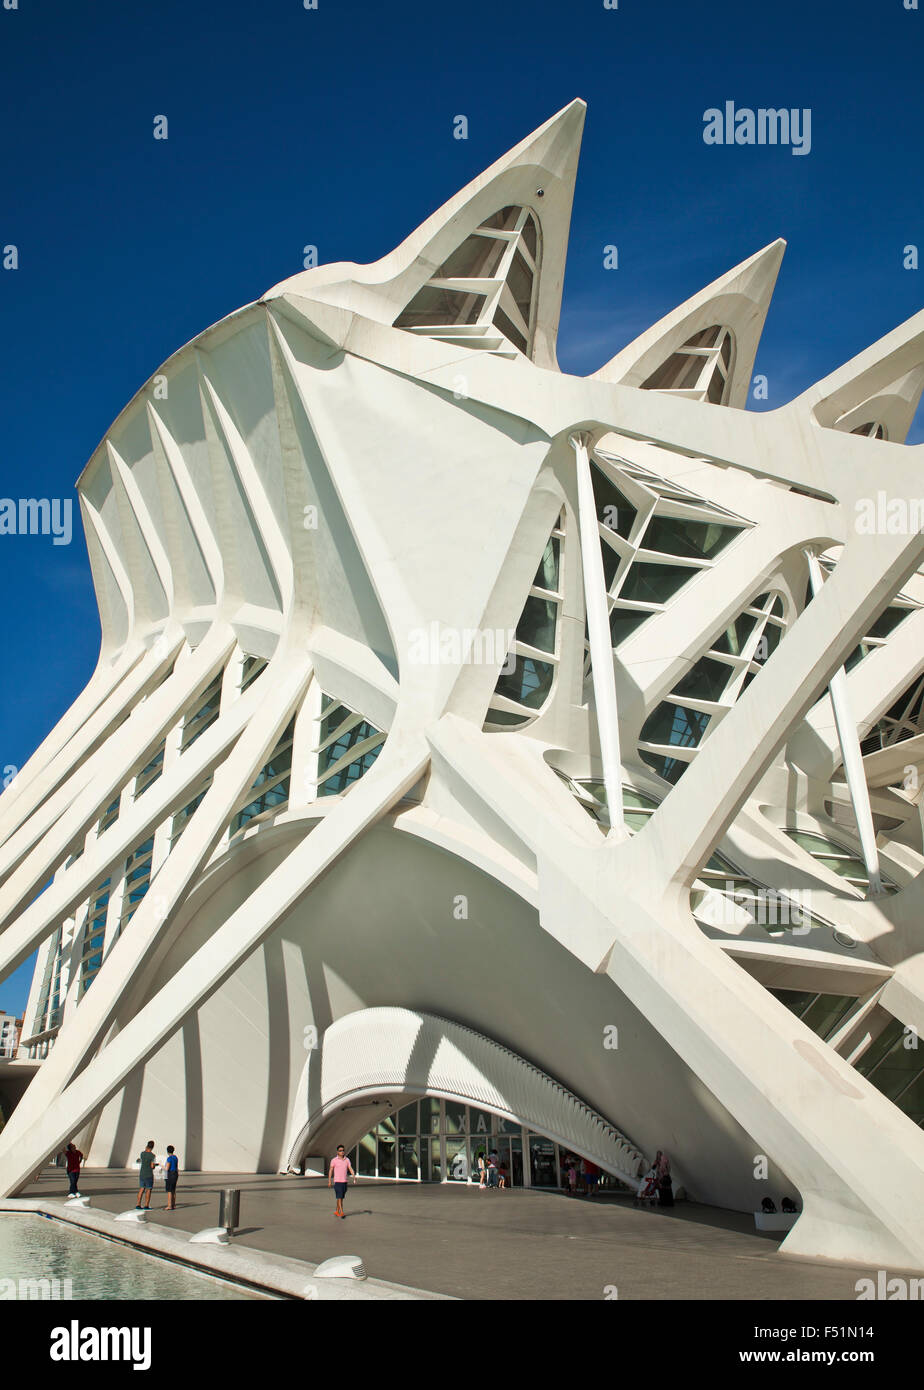 Entrance to the Príncipe Felipe Science Museum, City of Arts and Sciences, Valencia, Spain. Stock Photo